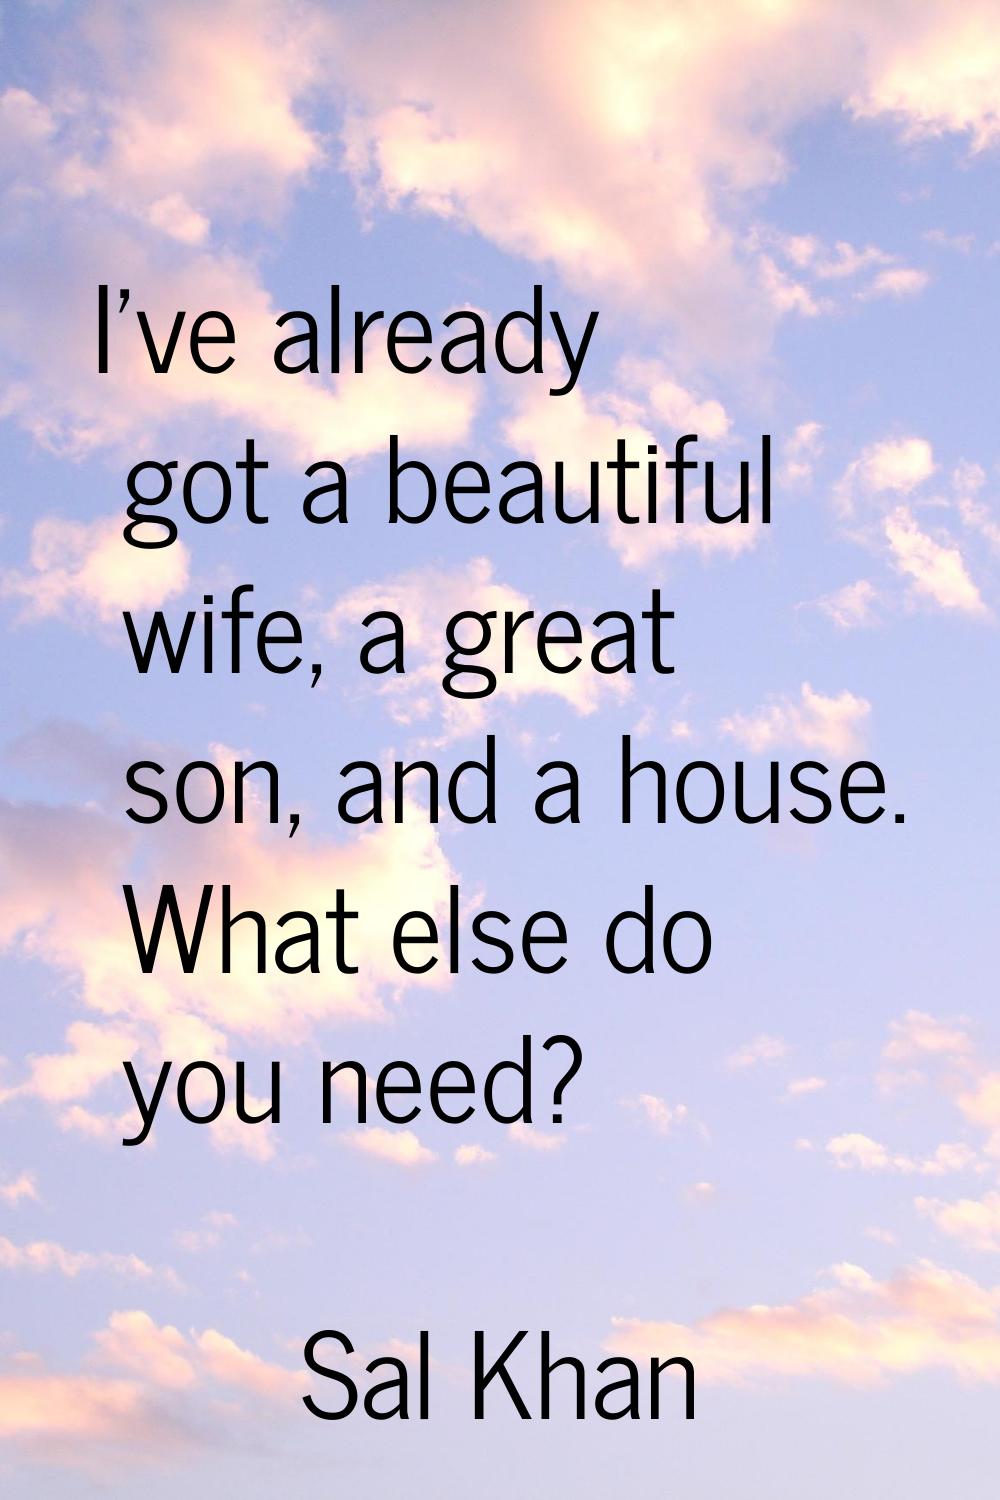 I've already got a beautiful wife, a great son, and a house. What else do you need?